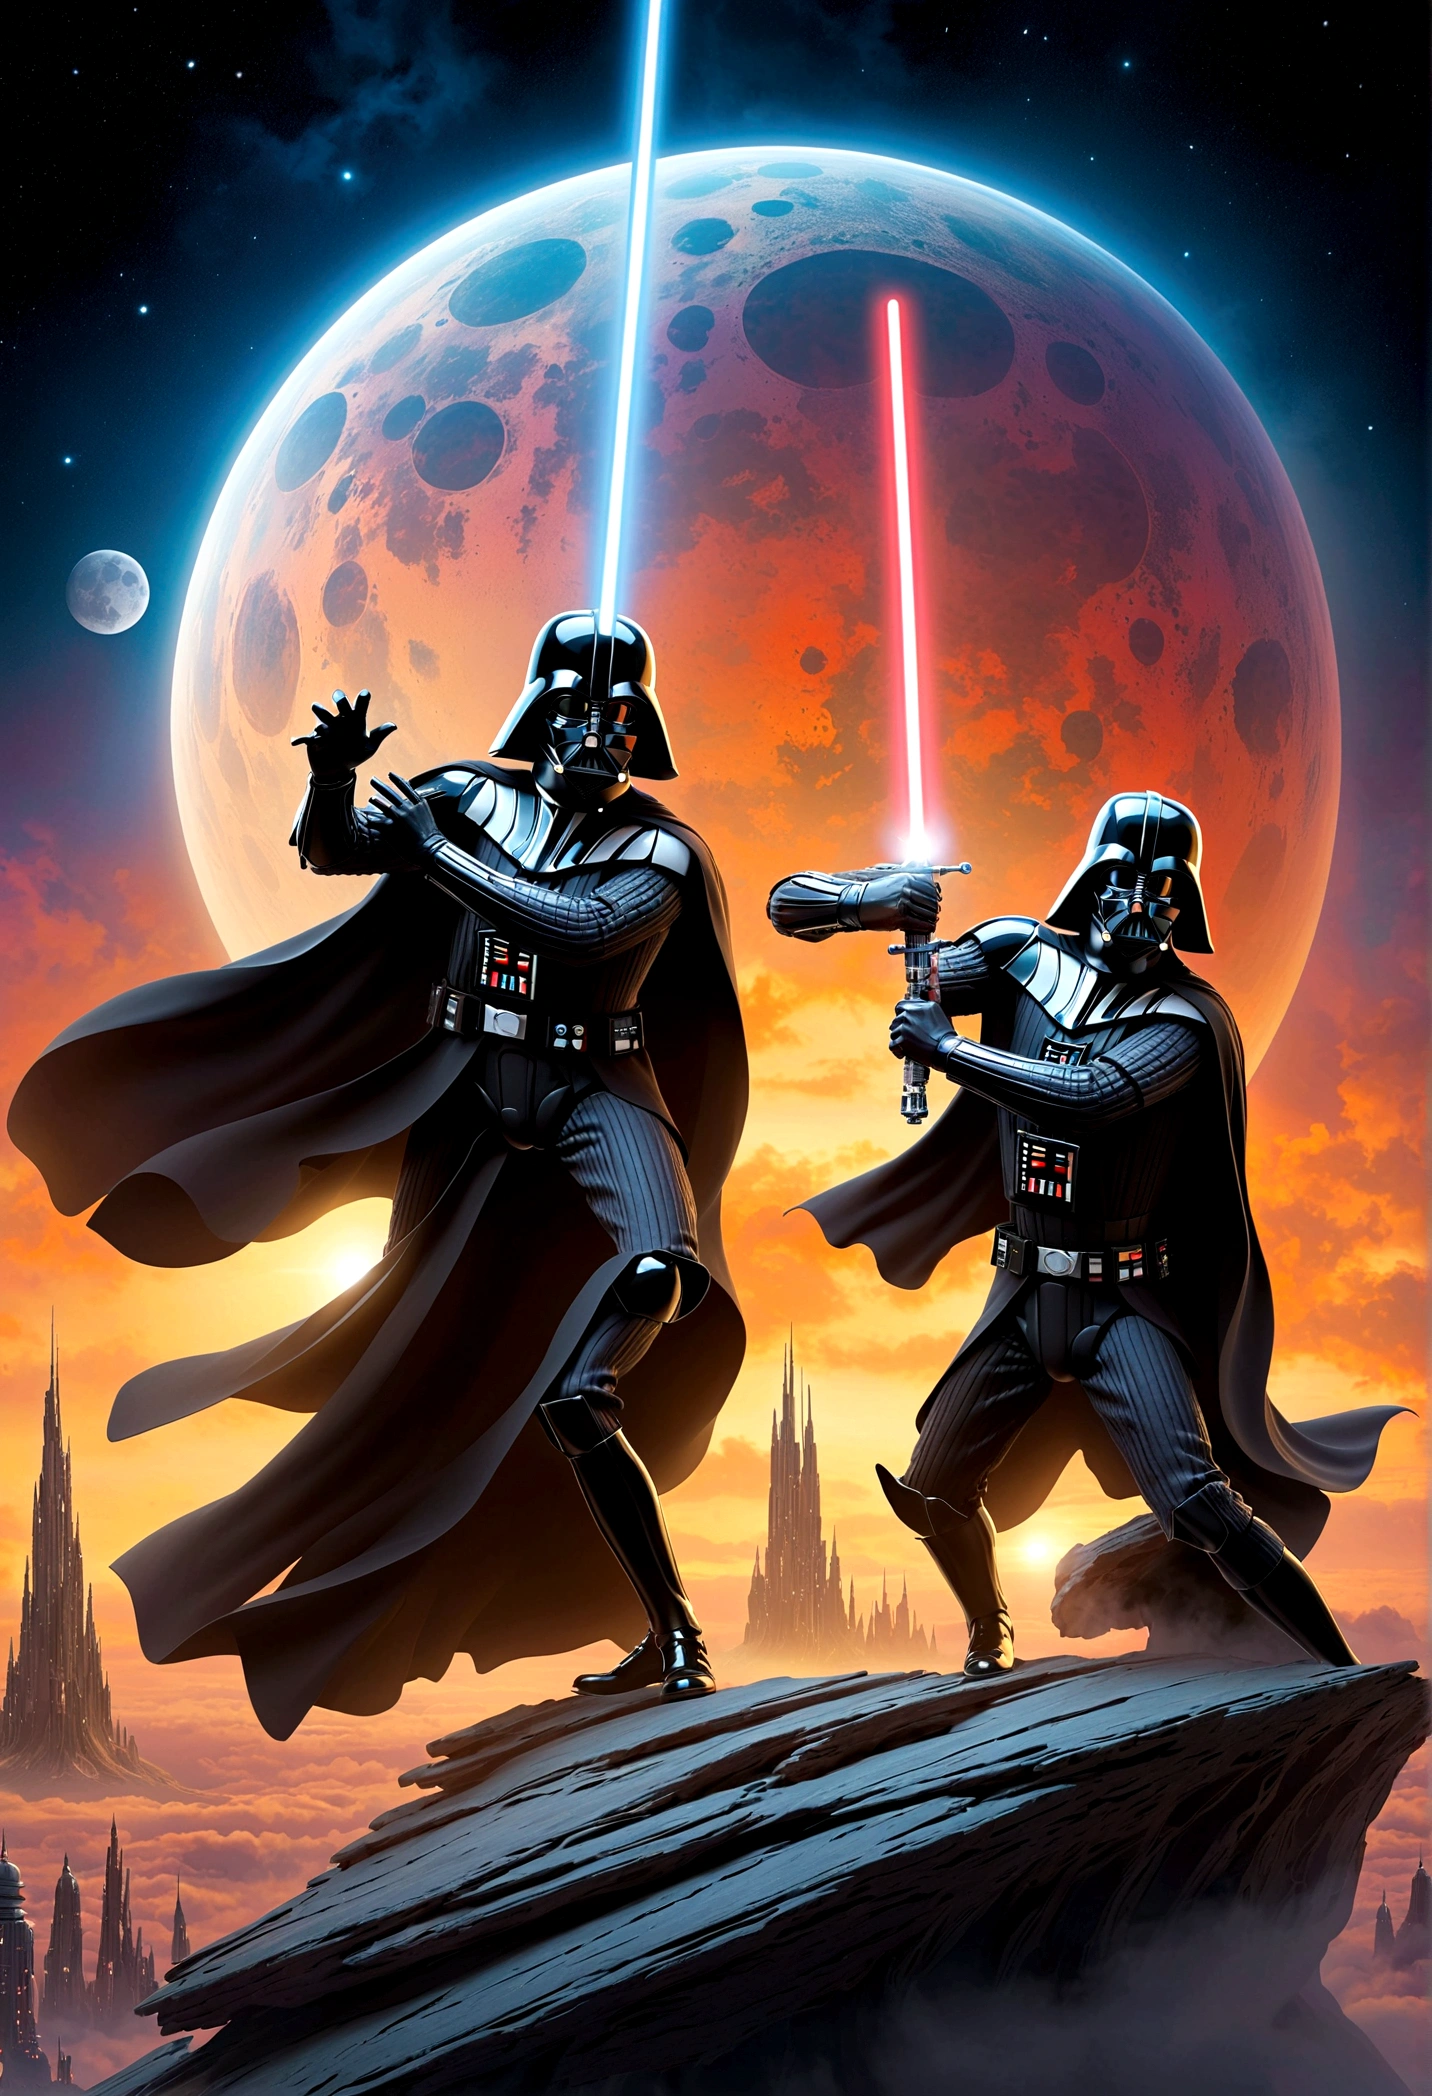 Star Wars rock opera, Luke Skywalker and  Darth Vader are dueling using guitars. emotional, powerful, dramatic, dueling power ballads, Bespin Cloud City